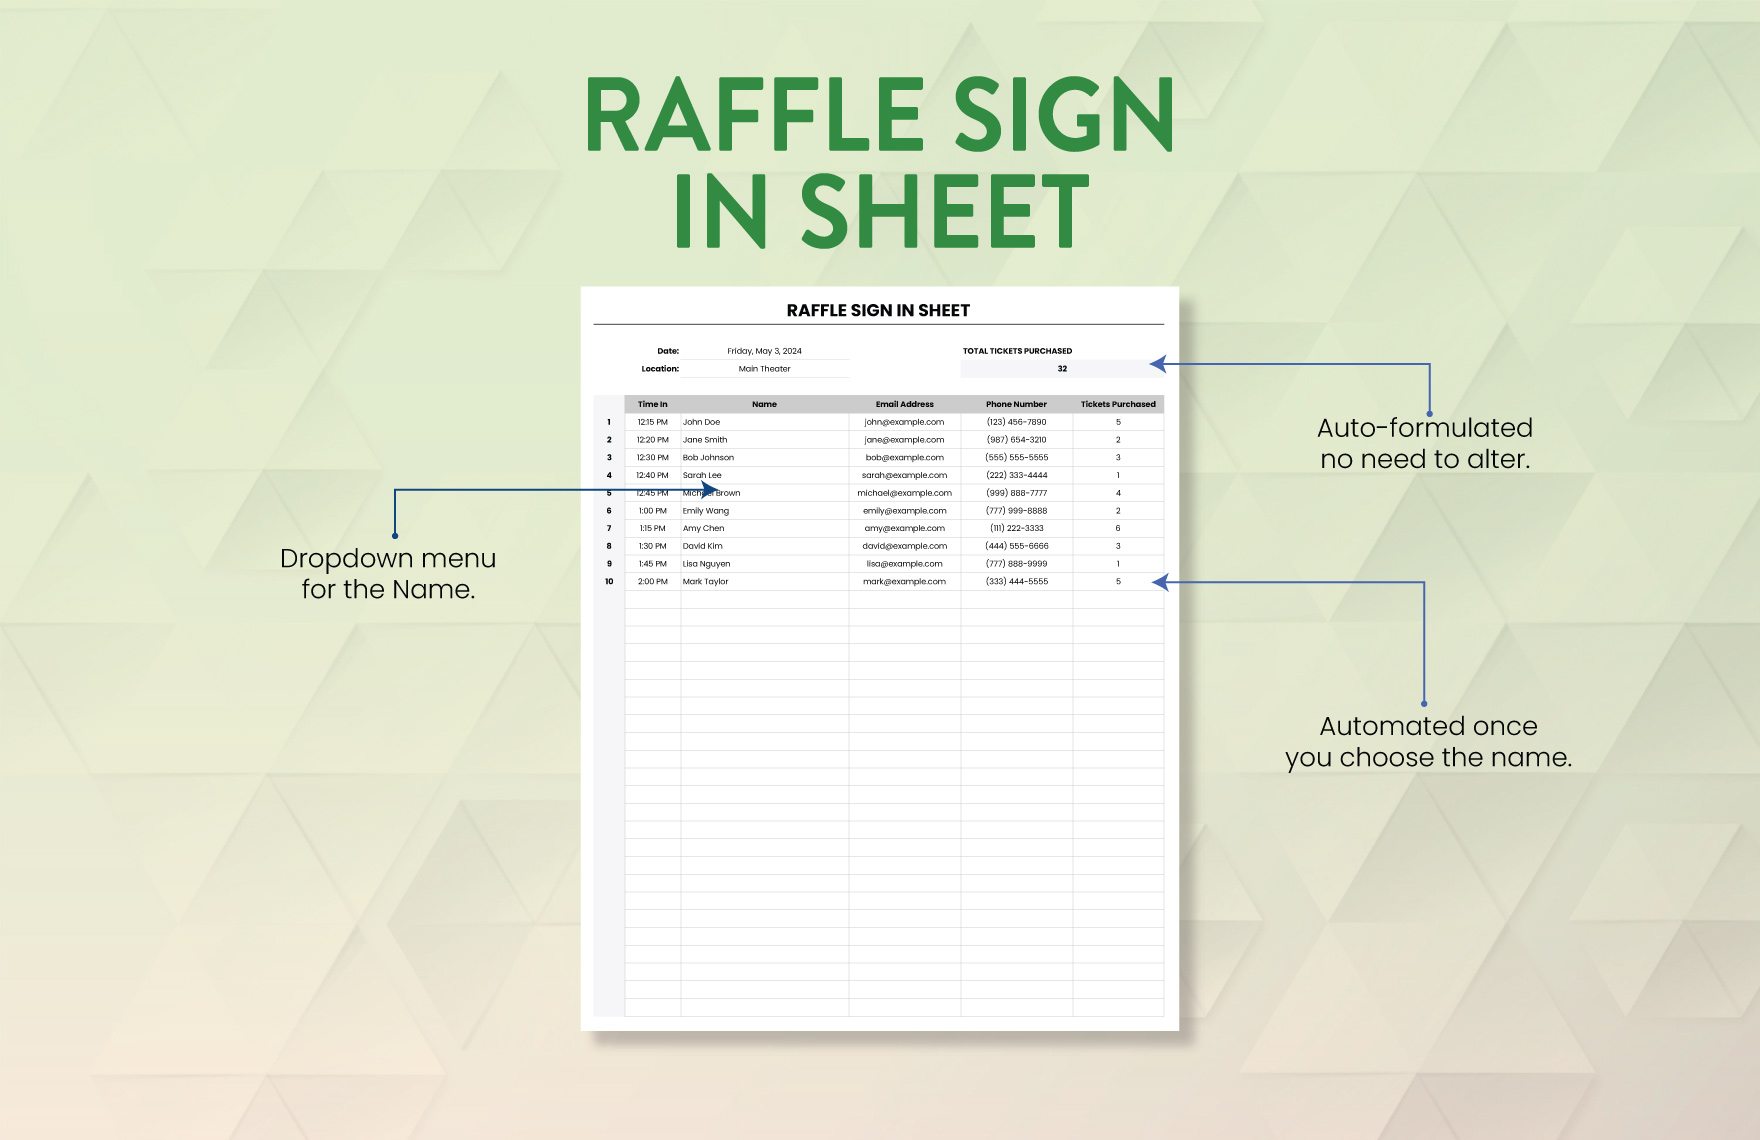 Raffle Sign in Sheet Template